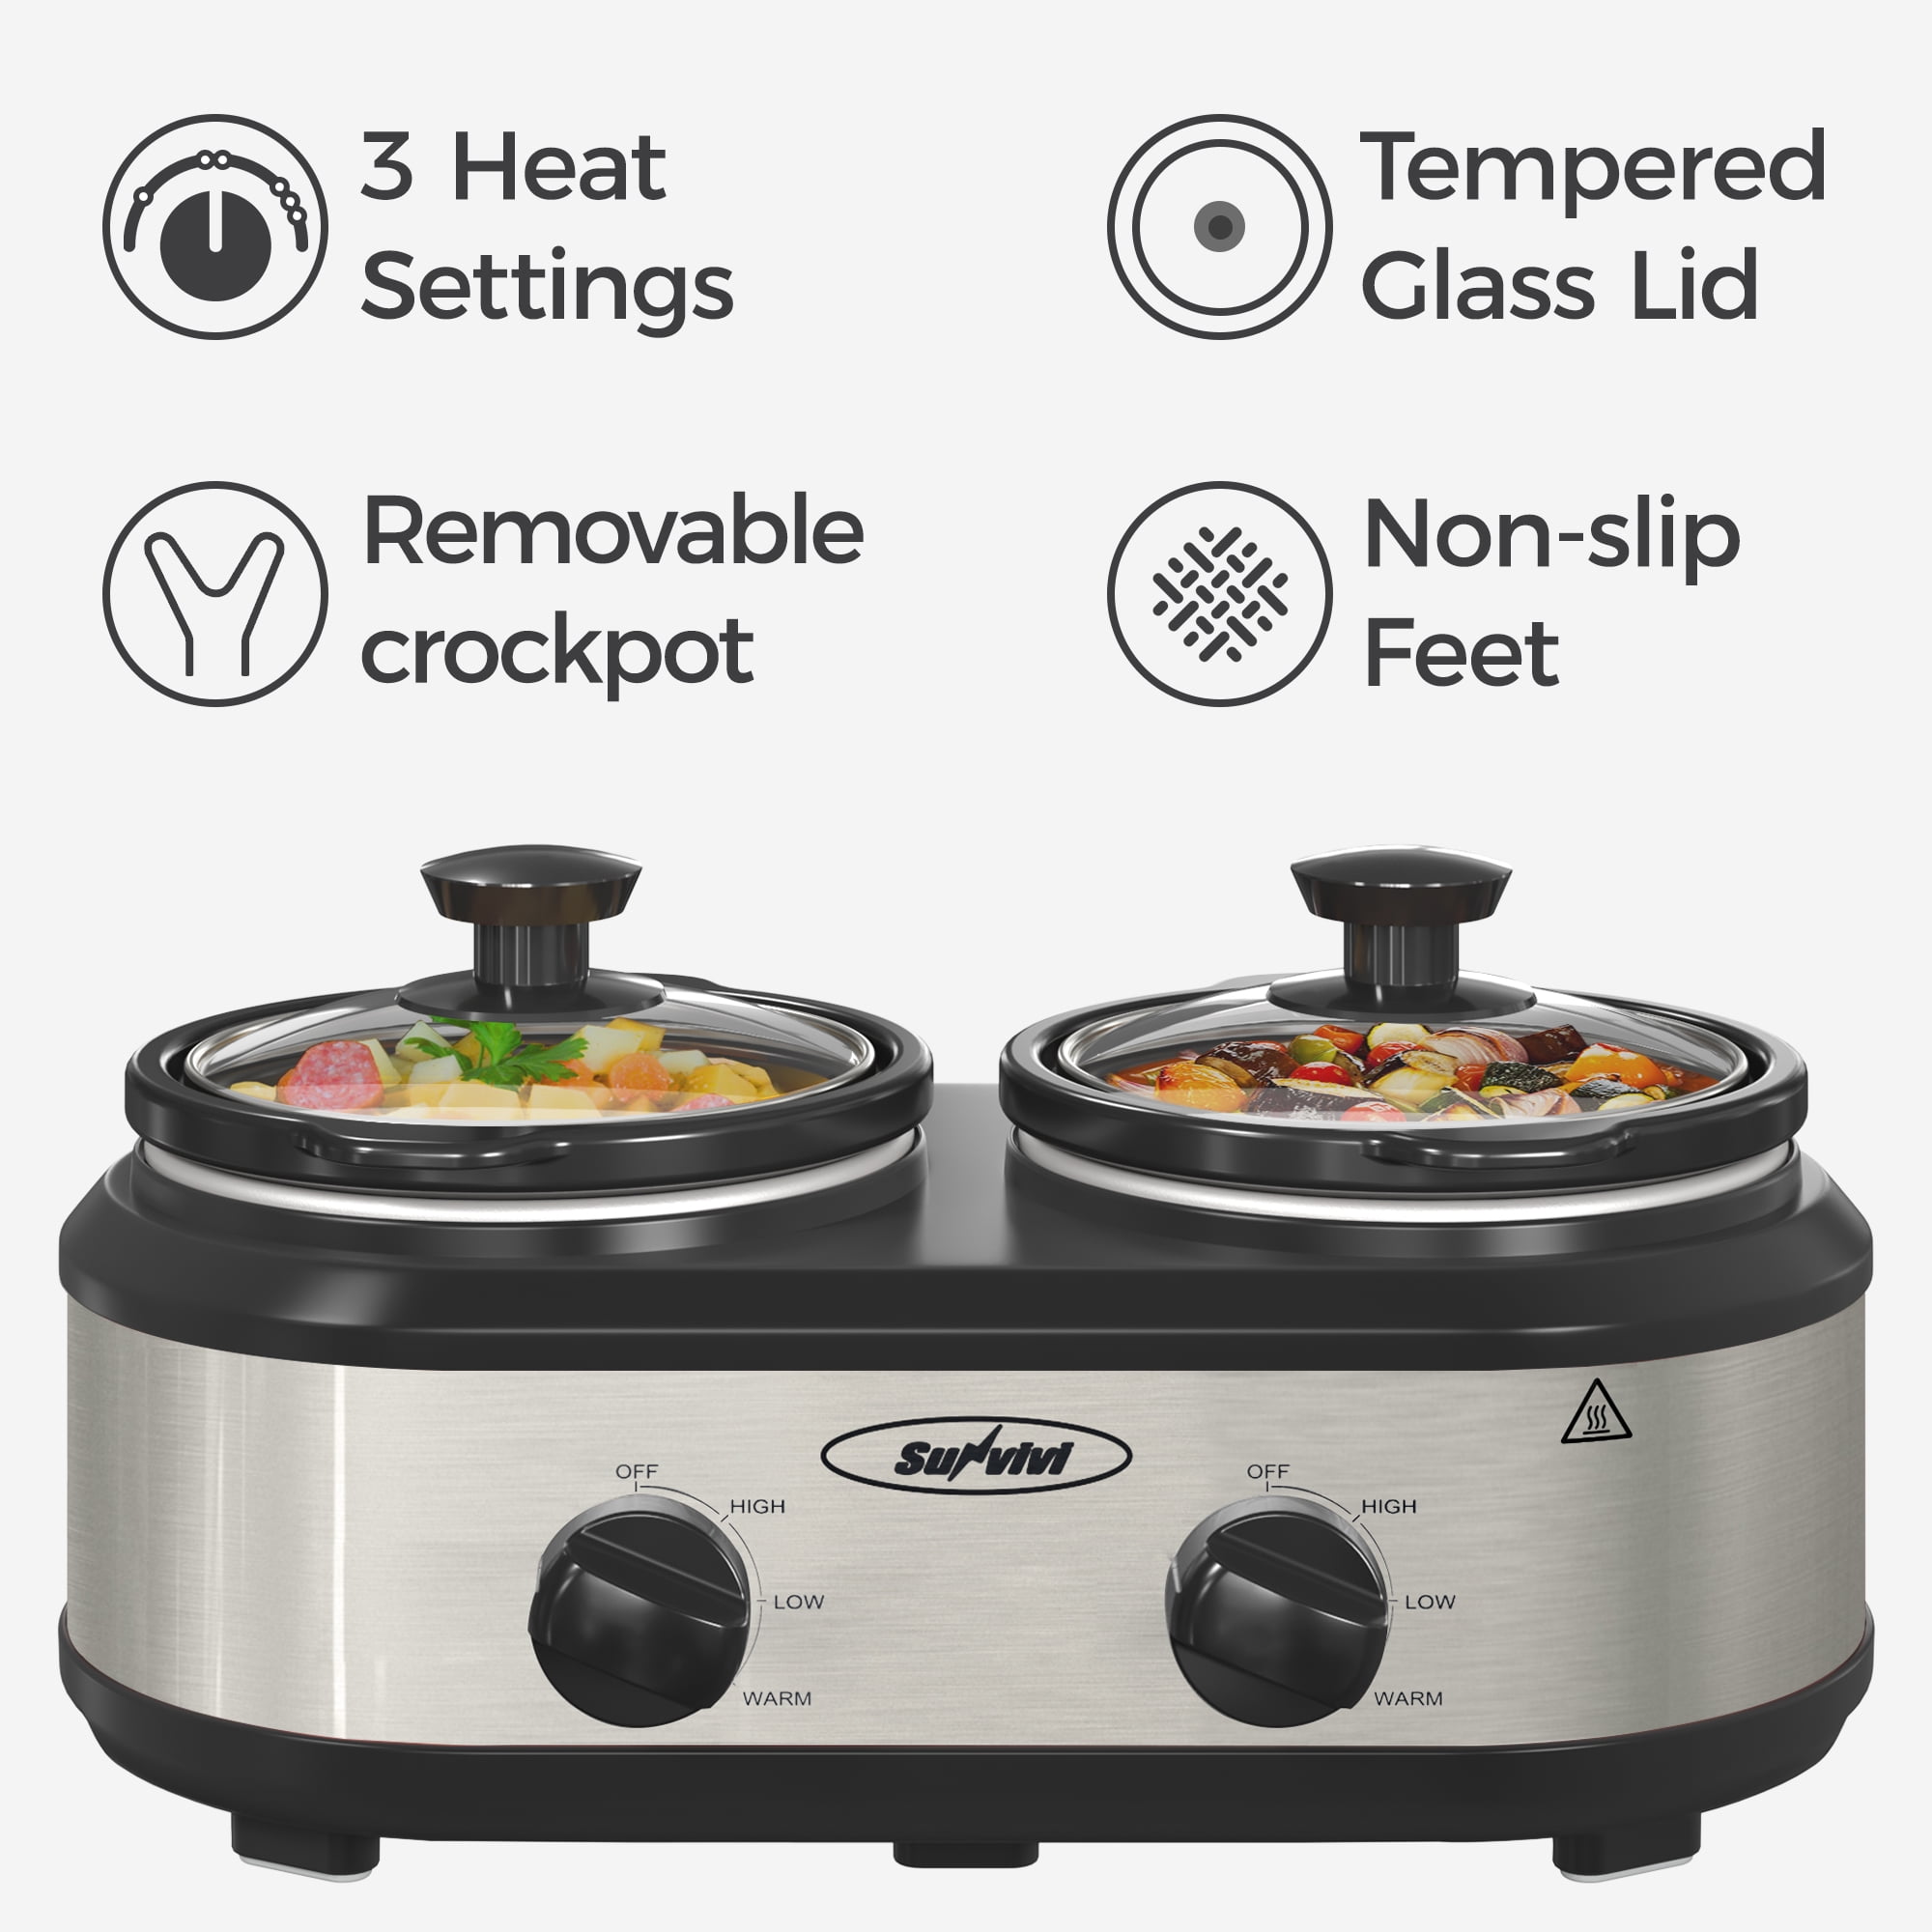 Grab 3 Crock-Pot Lunch Food Warmers for just $33 shipped today ($66+ value)